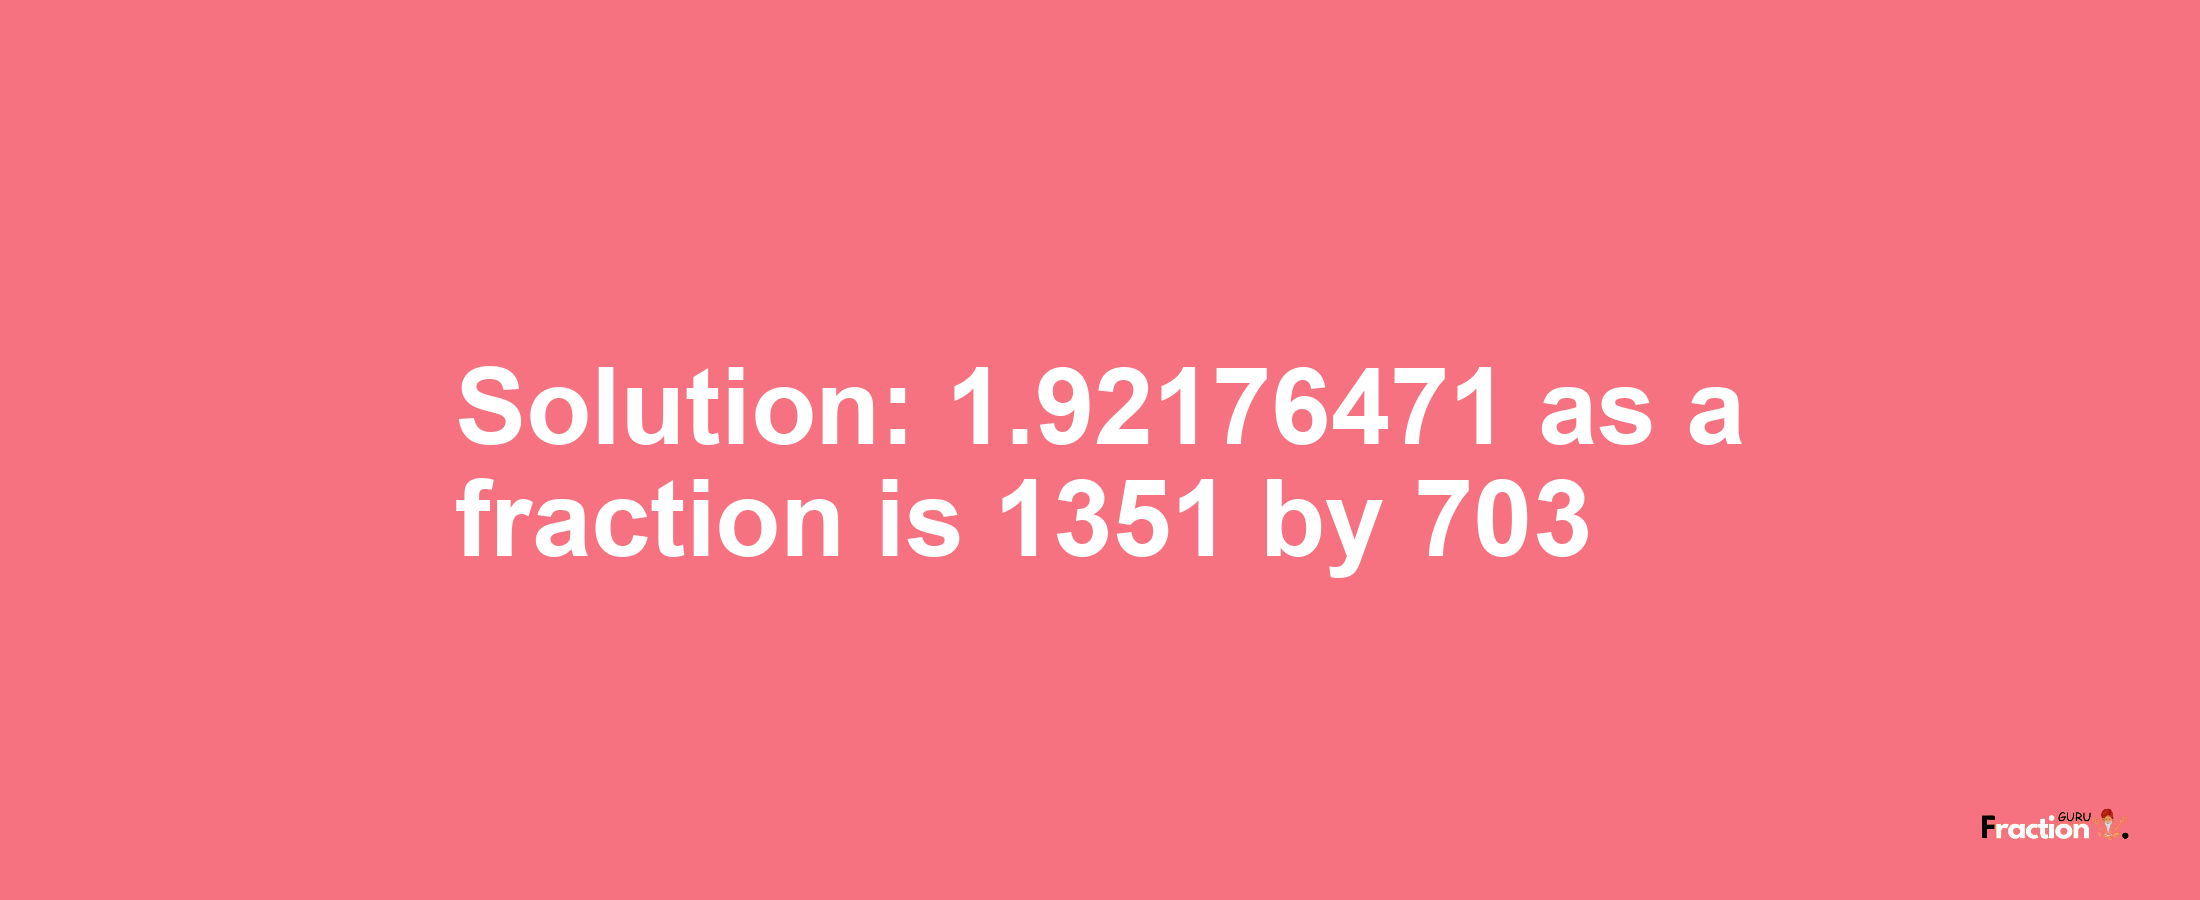 Solution:1.92176471 as a fraction is 1351/703